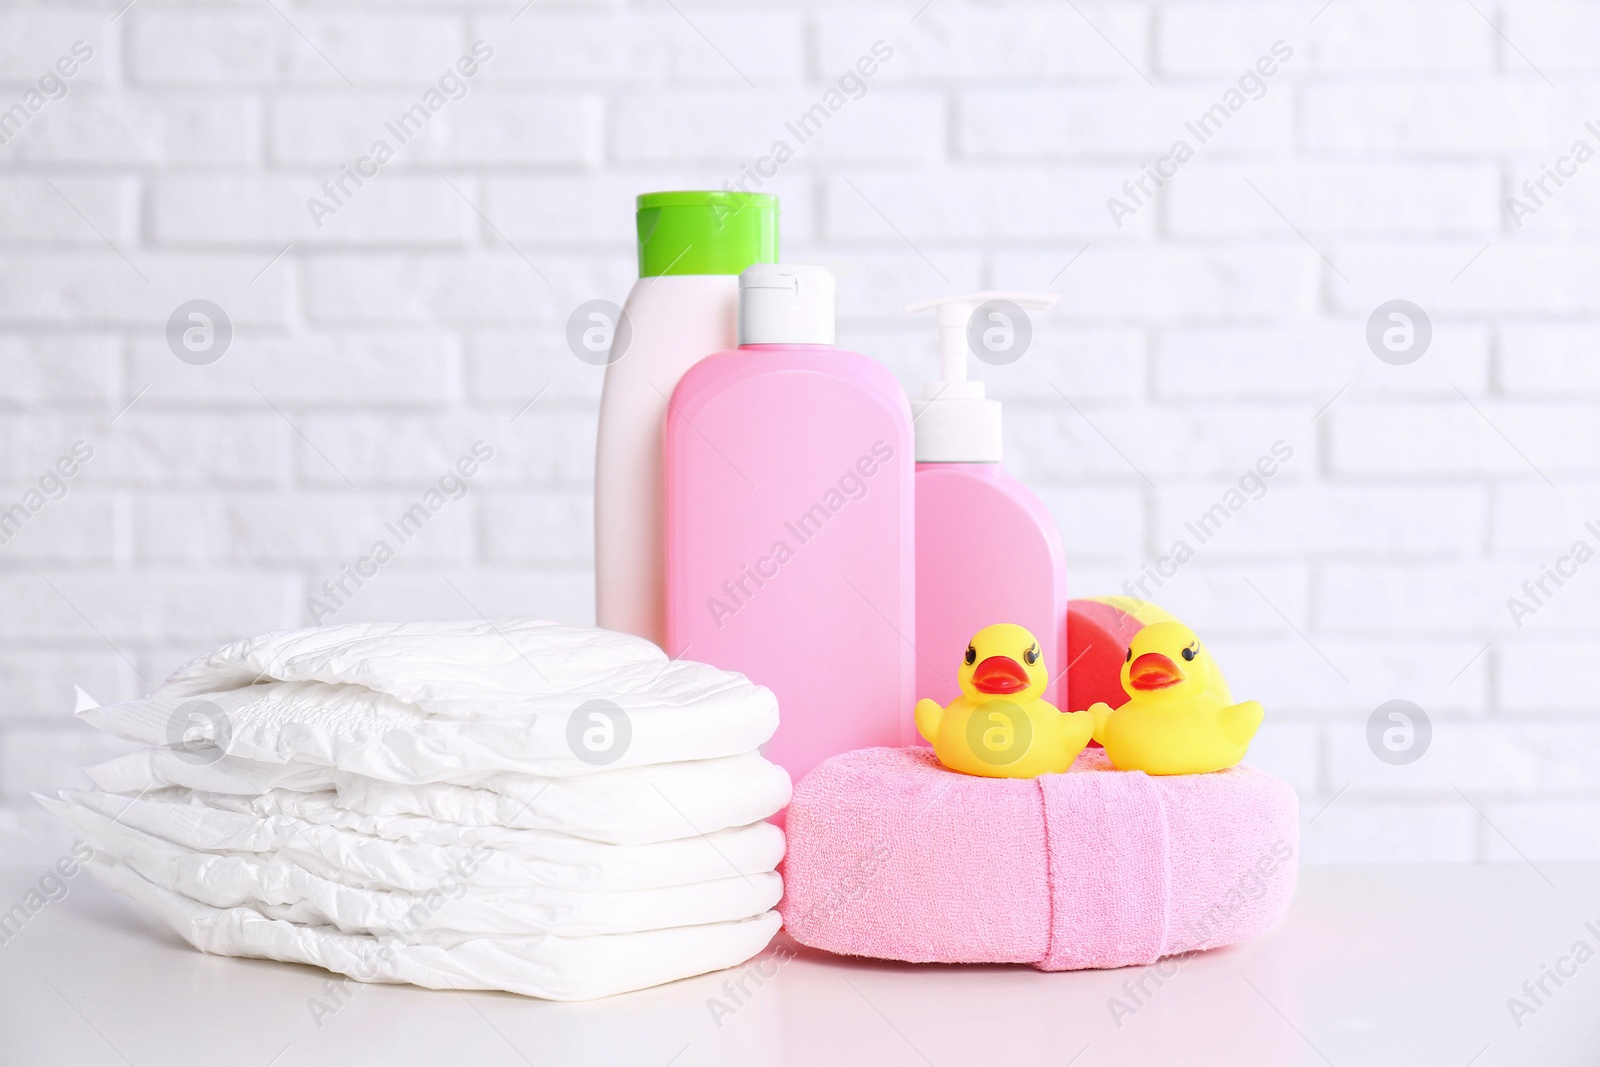 Photo of Baby accessories on table near white brick wall